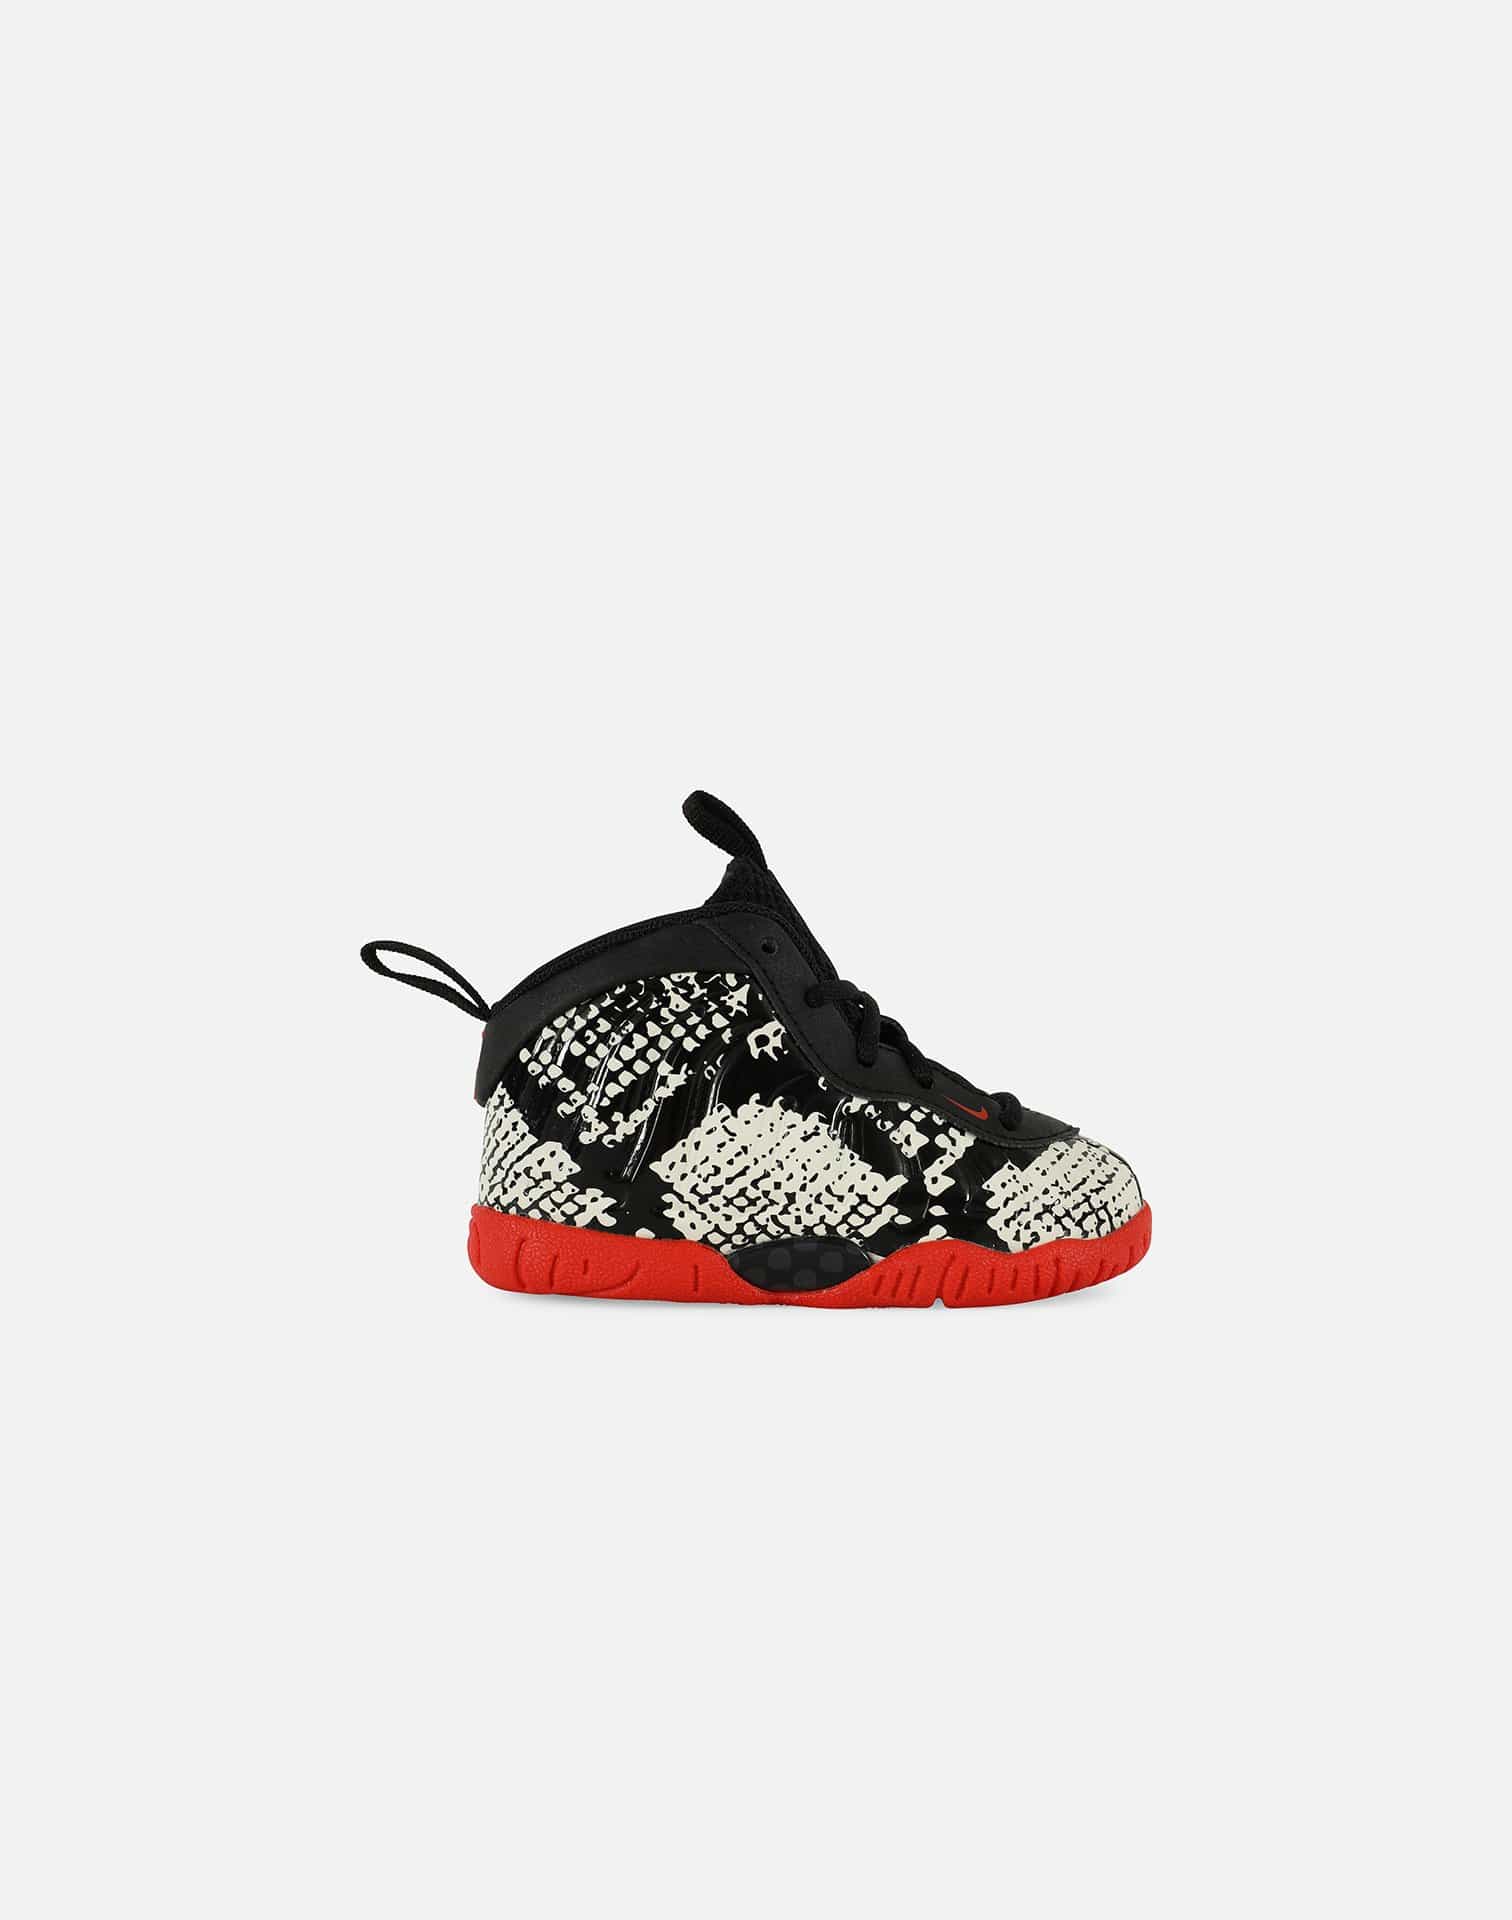 Nike LIL' POSITE ONE INFANT